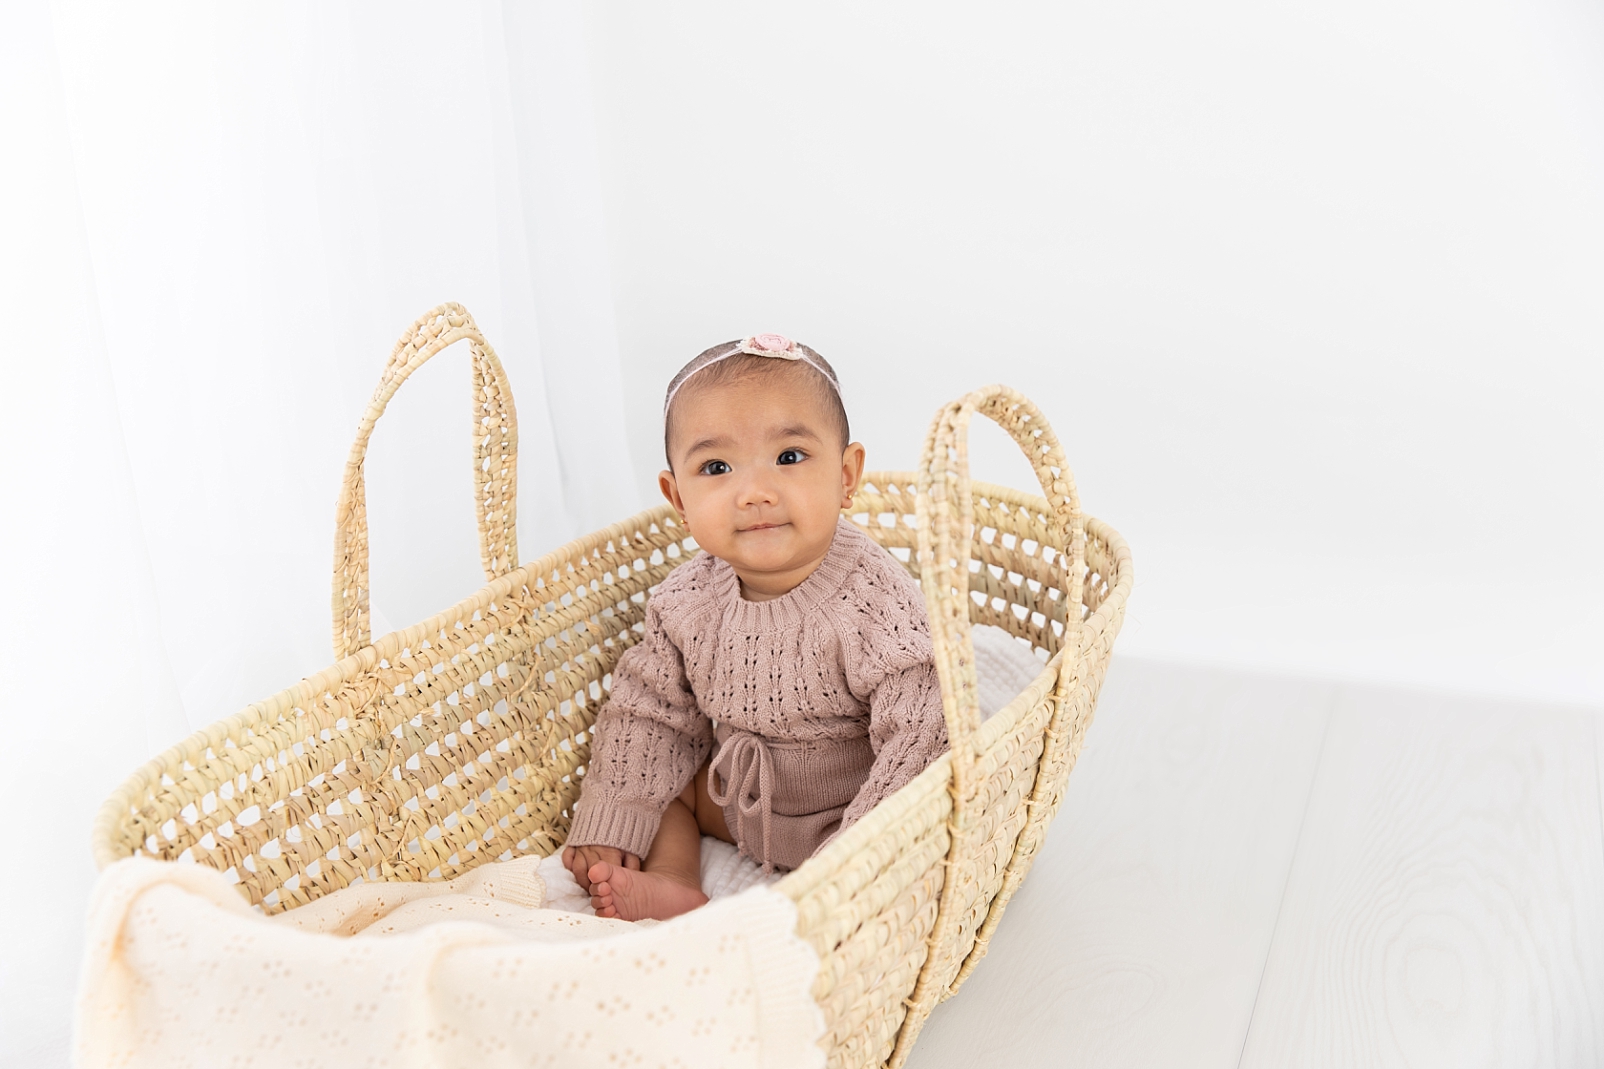 7 month old baby in a knit outfit sitting in a Moses basket taken during the First Year Membership with Maryland Baby Photographer